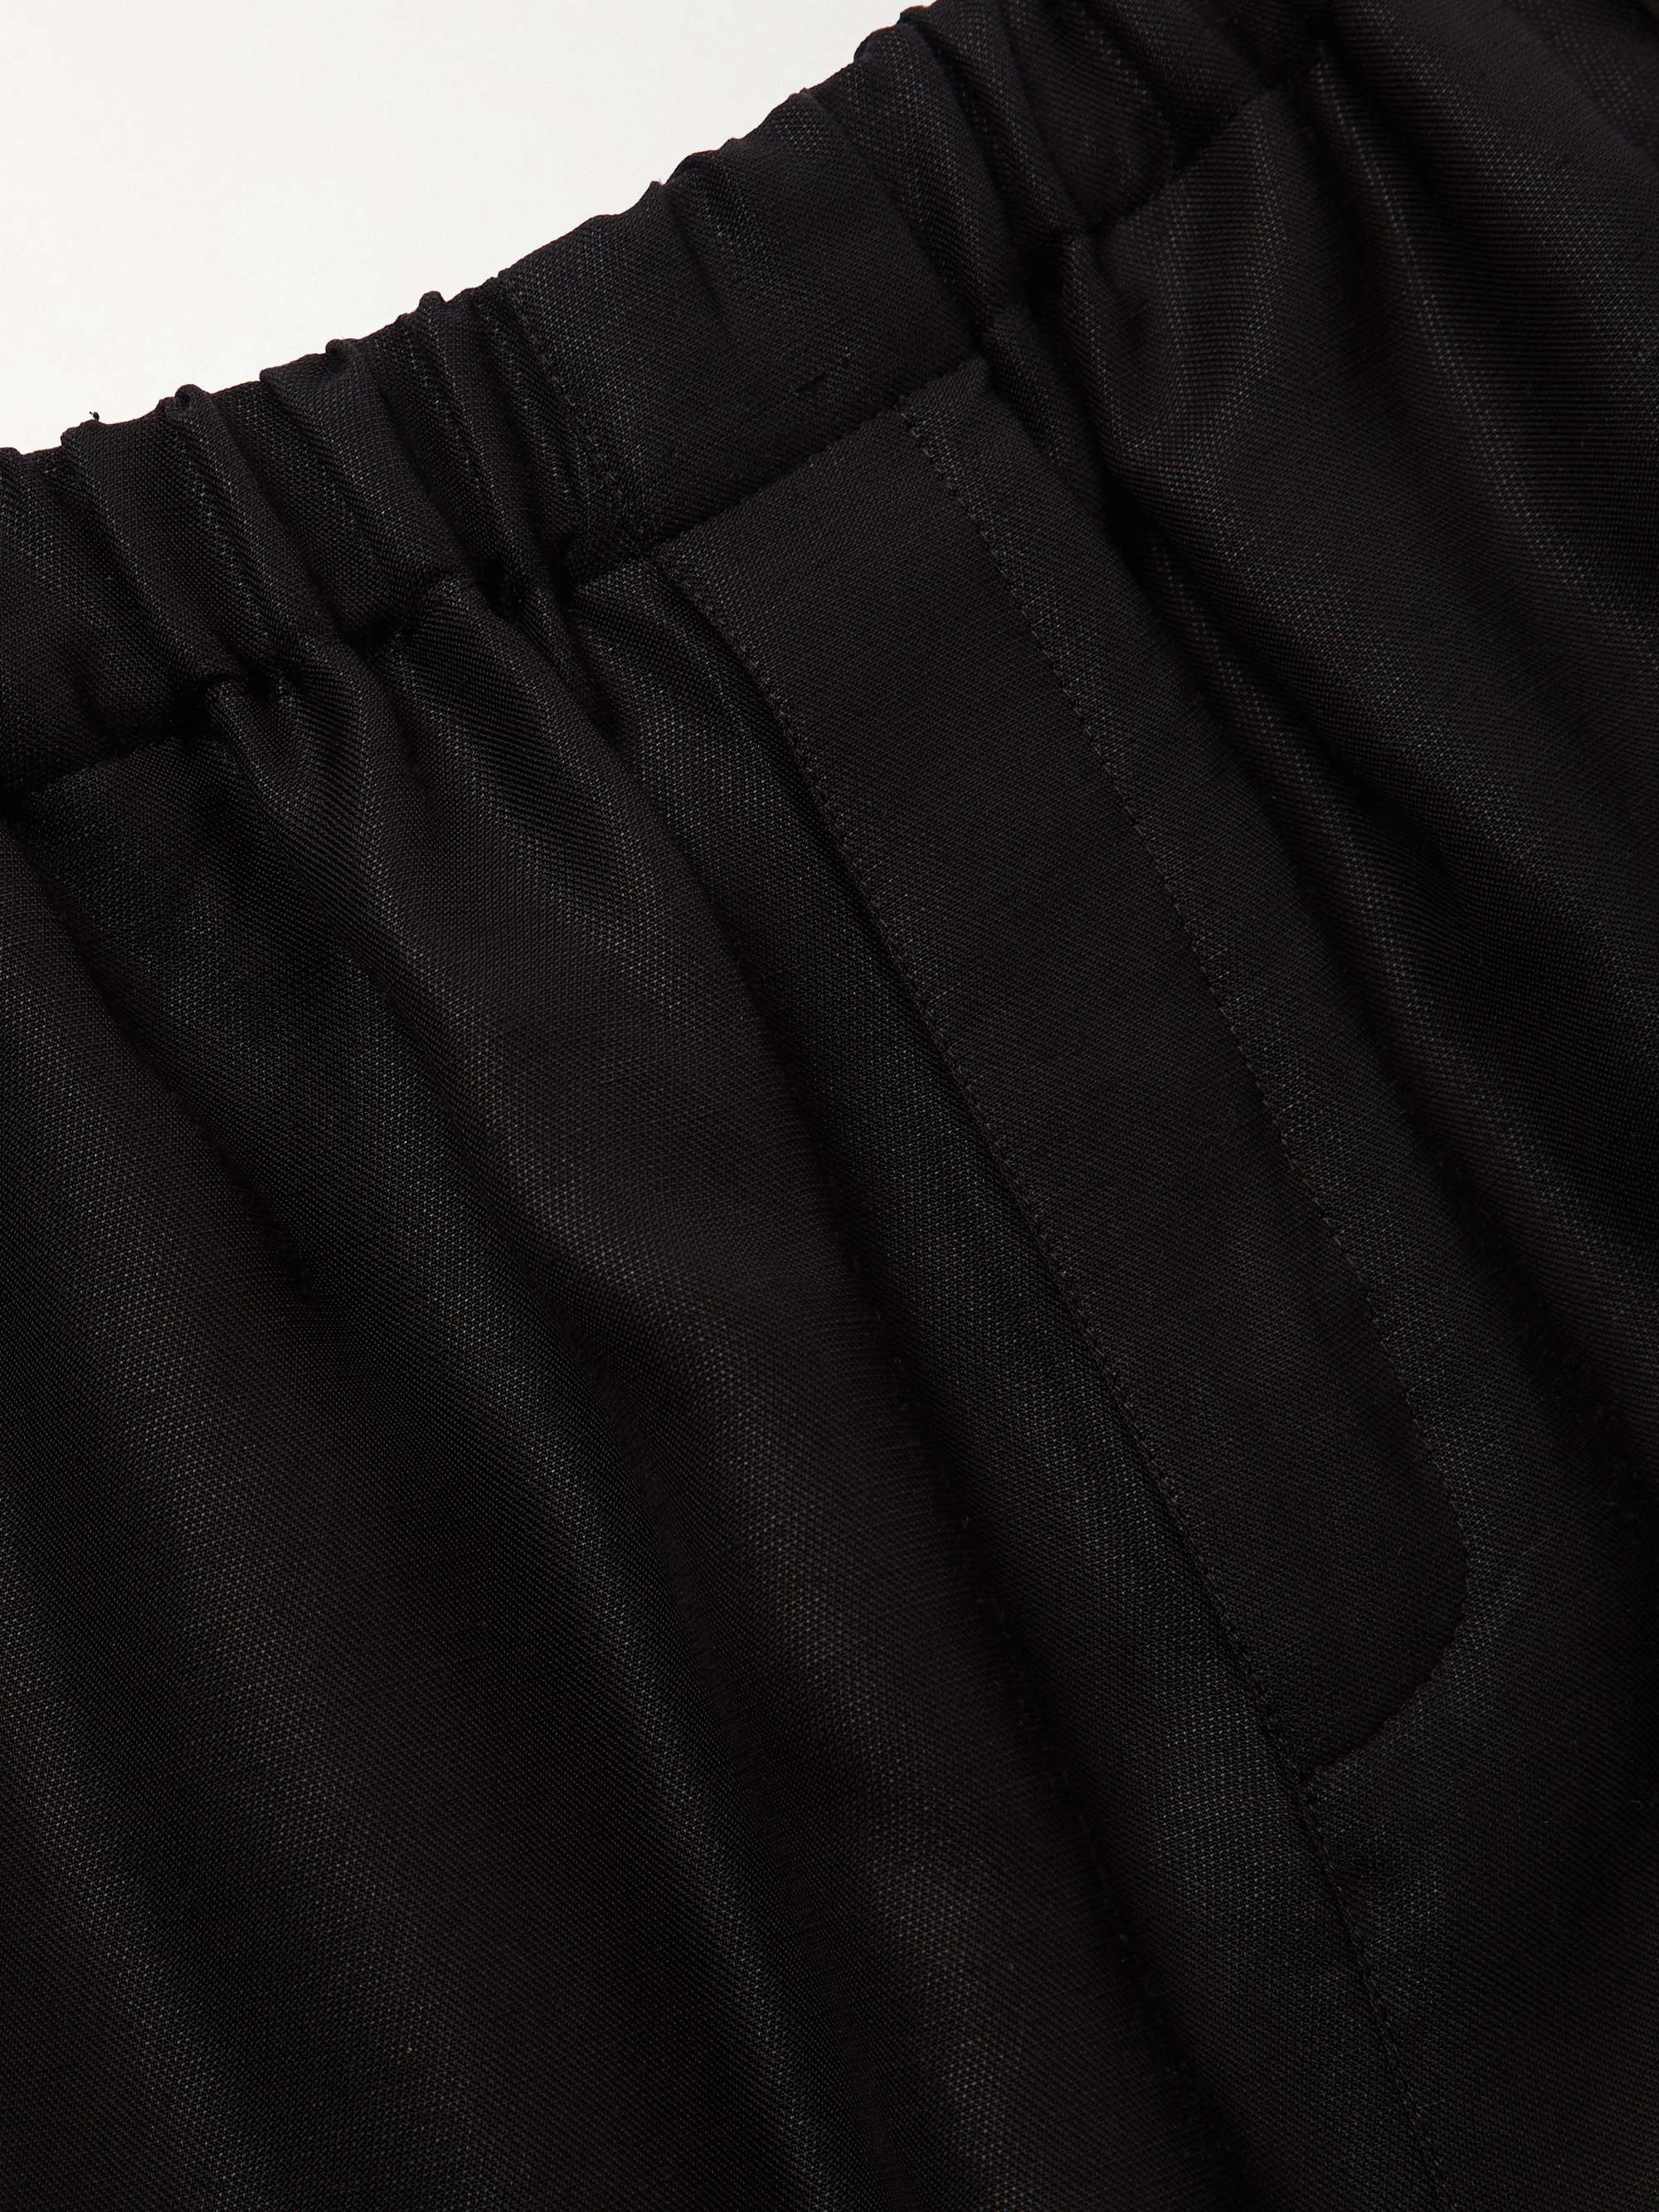 SAINT LAURENT Tapered Shell Trousers